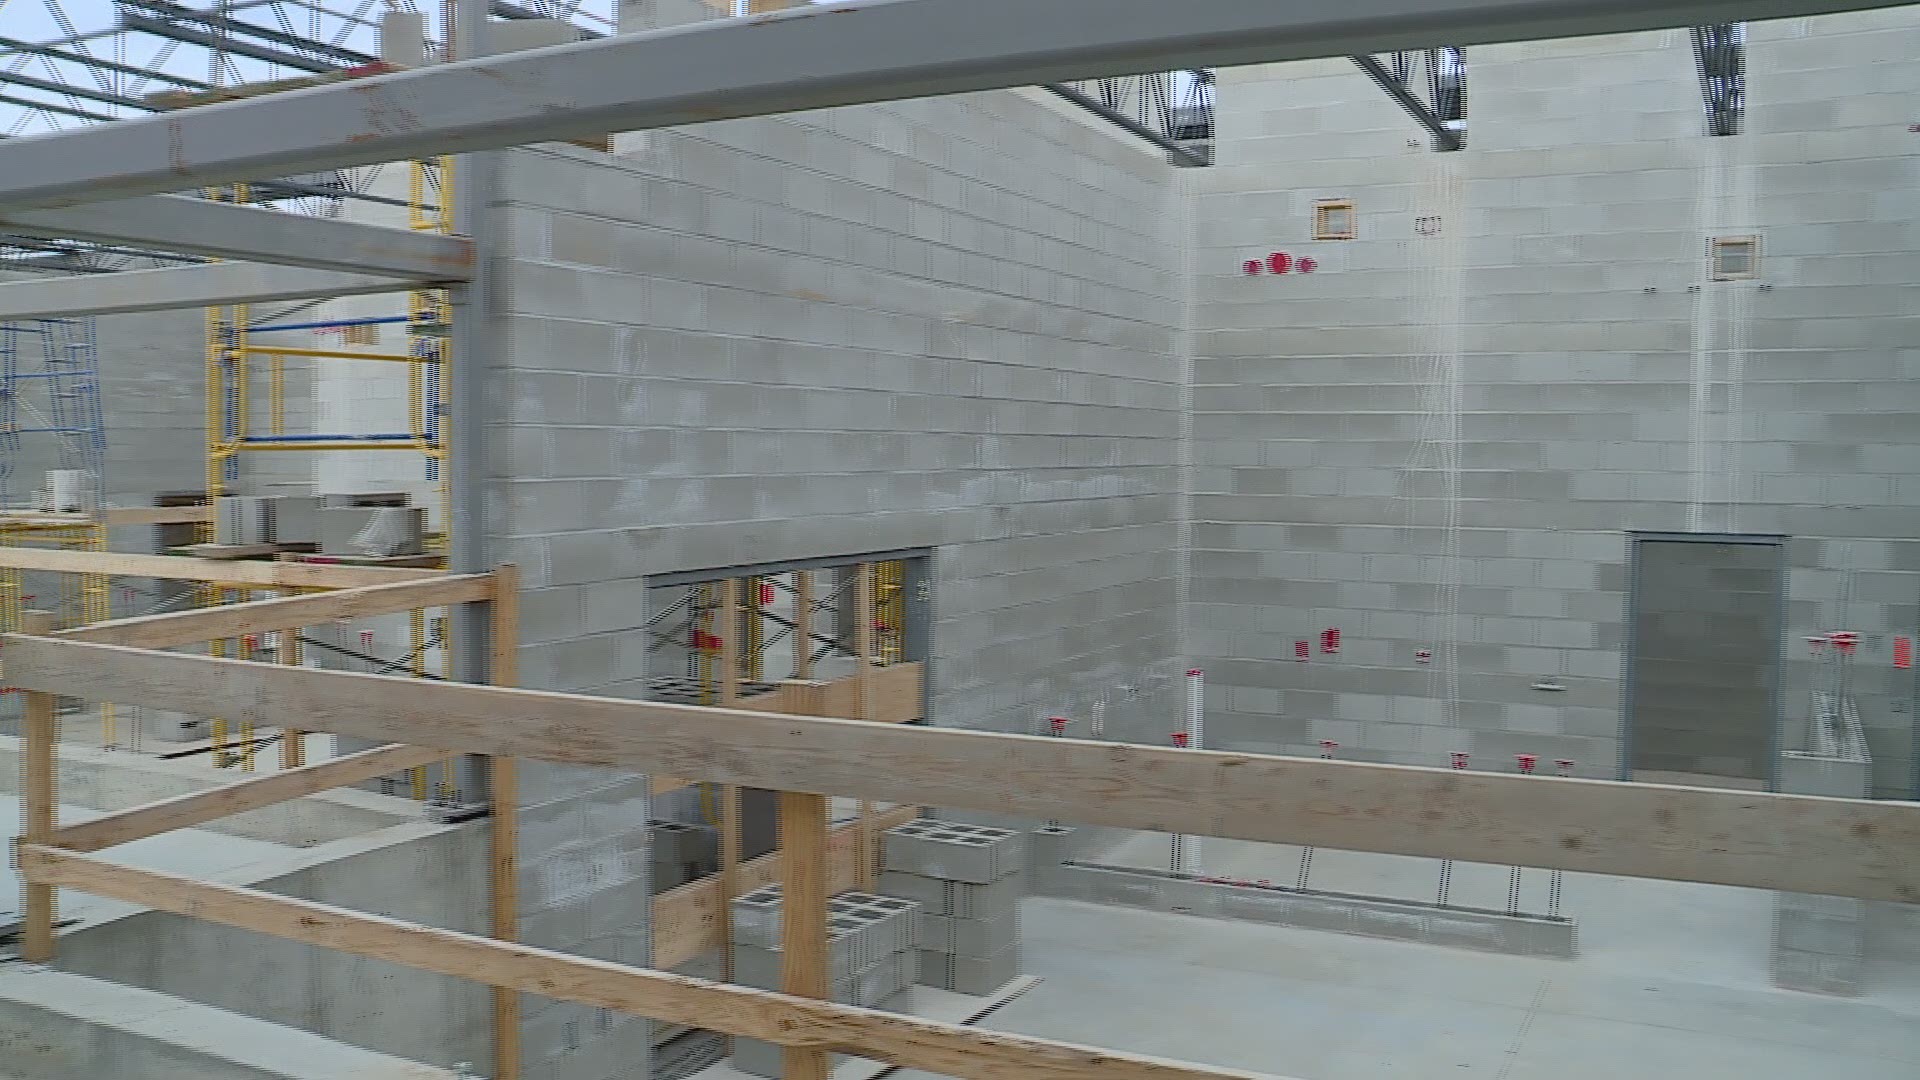 Construction on the Denver Zoo's new animal hospital is halfway complete.